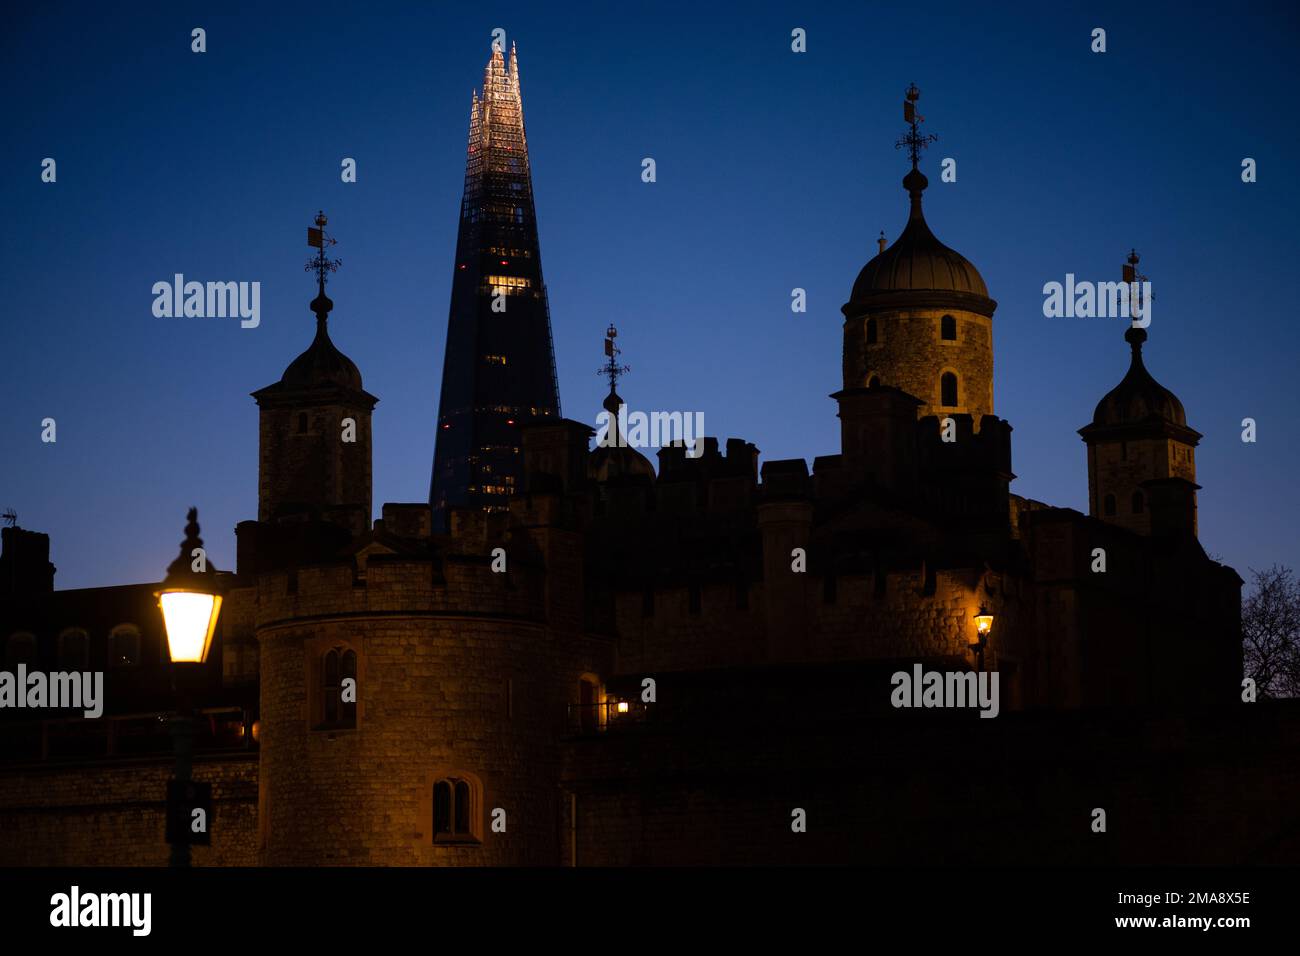 The Shard towers over the Tower of London. New and old in London, UK Stock Photo